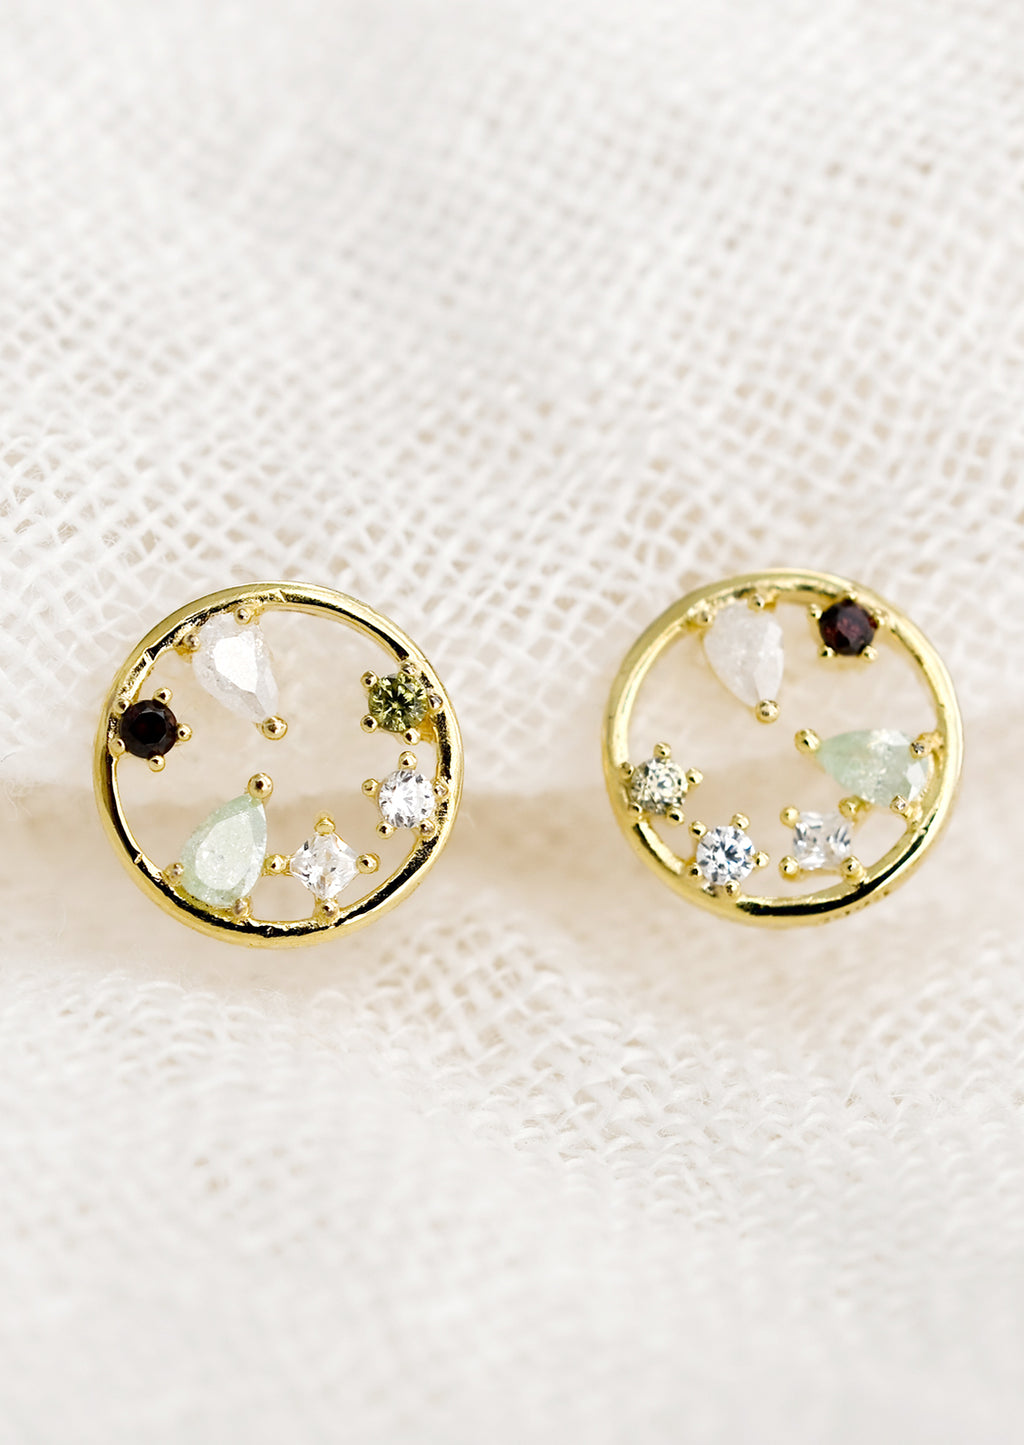 1: A pair of gold circular stud earrings with a mix of color and shape crystals inside the circle.